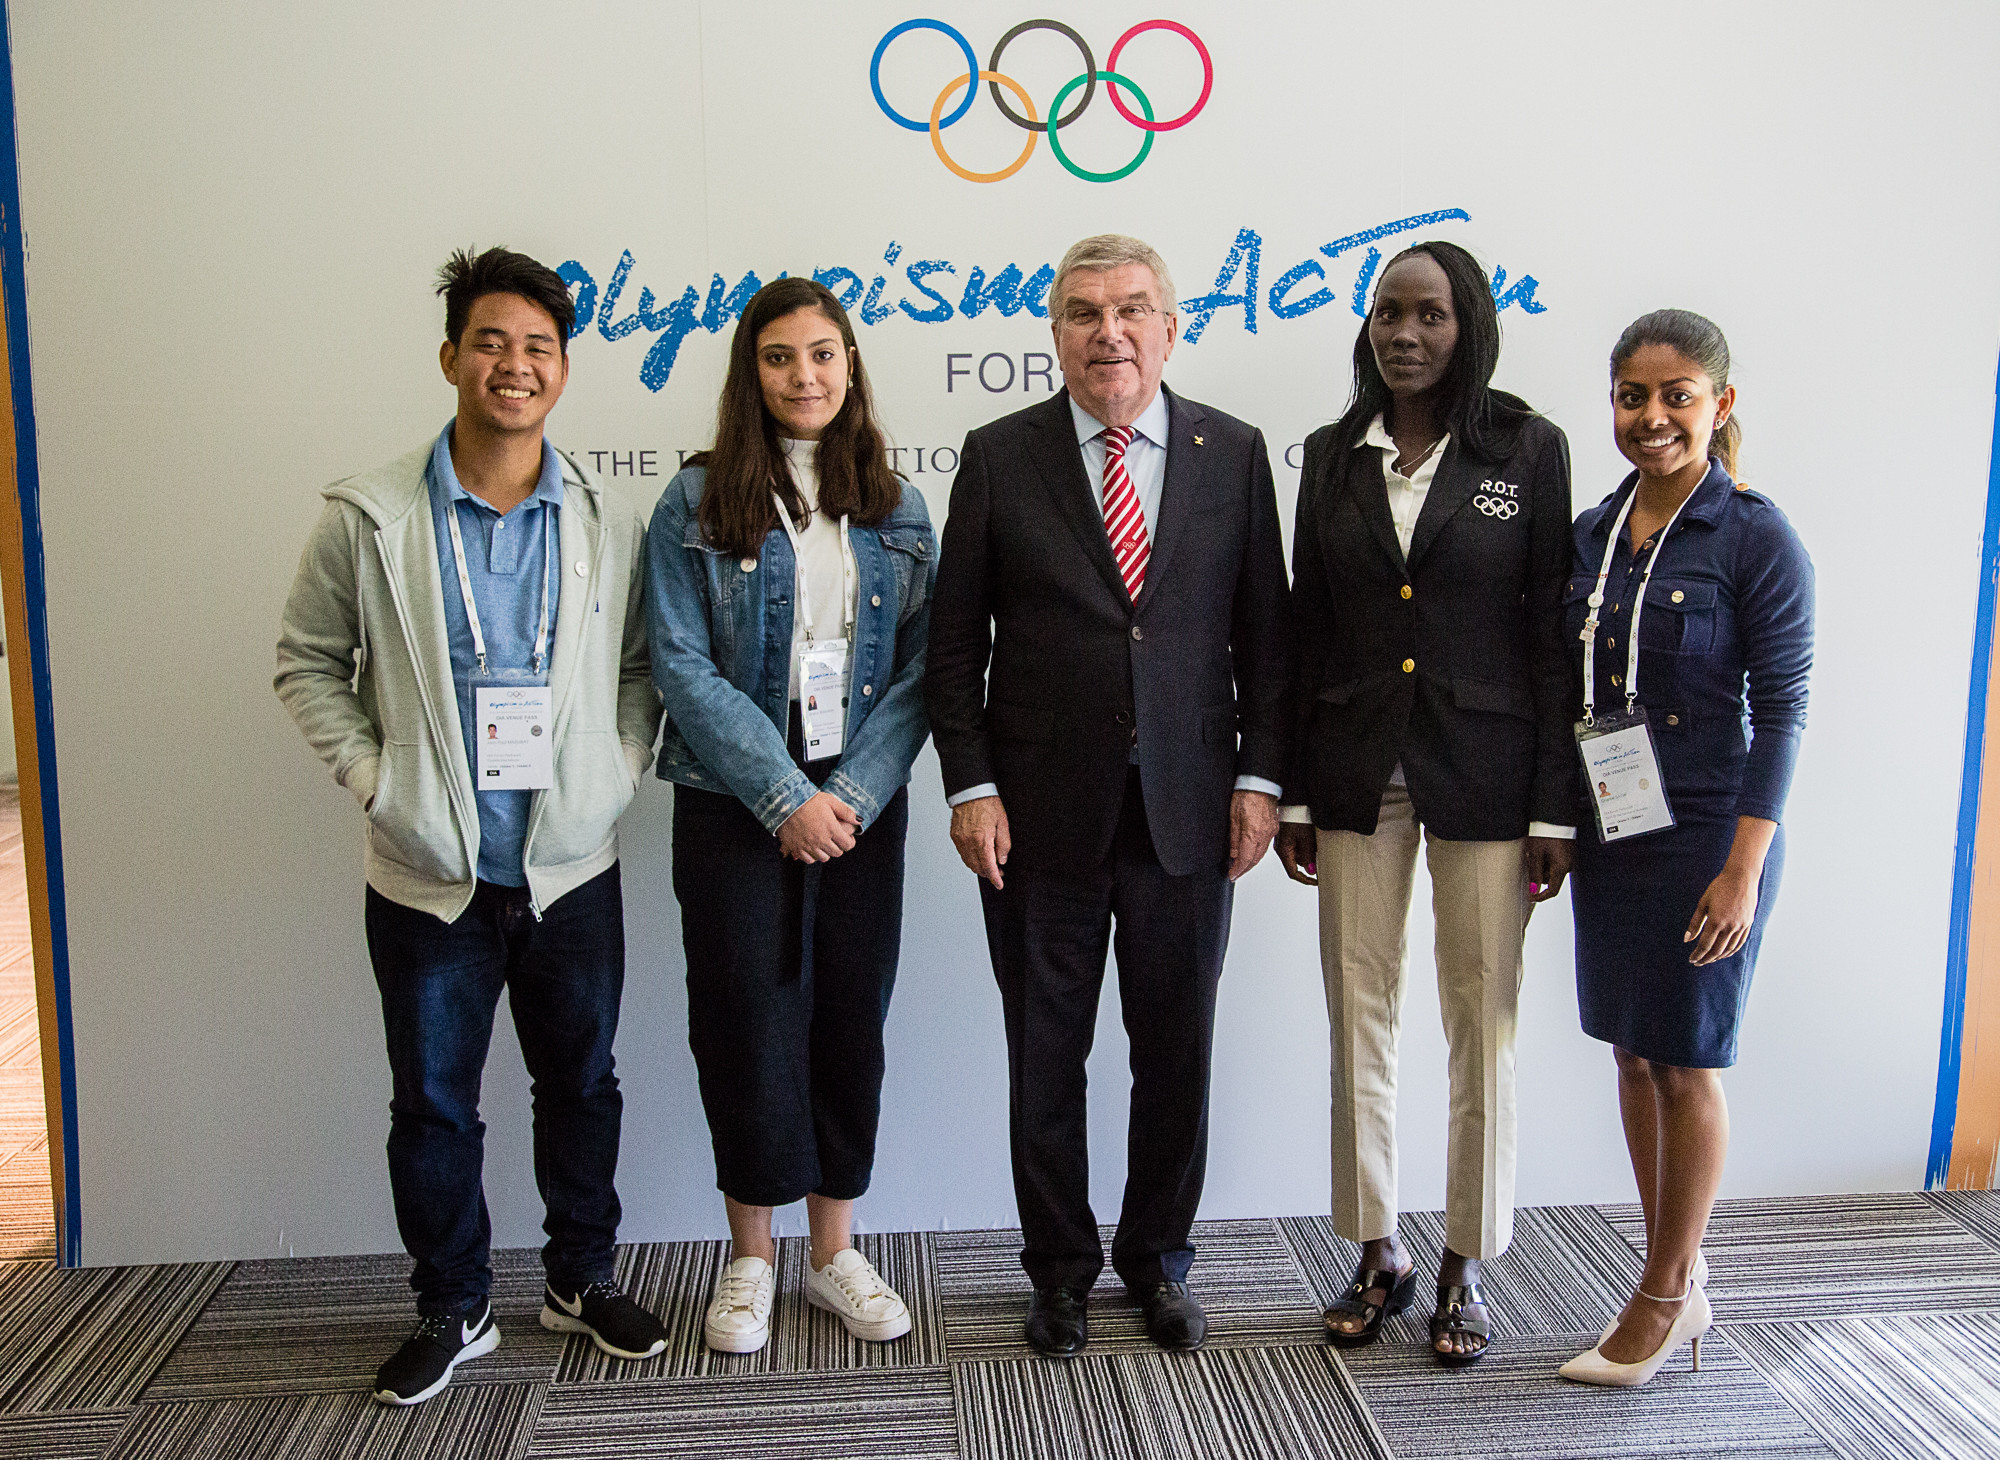 Bach meets athletes involved in Sport at the Service of Humanity’s Young Leaders Mentoring Program